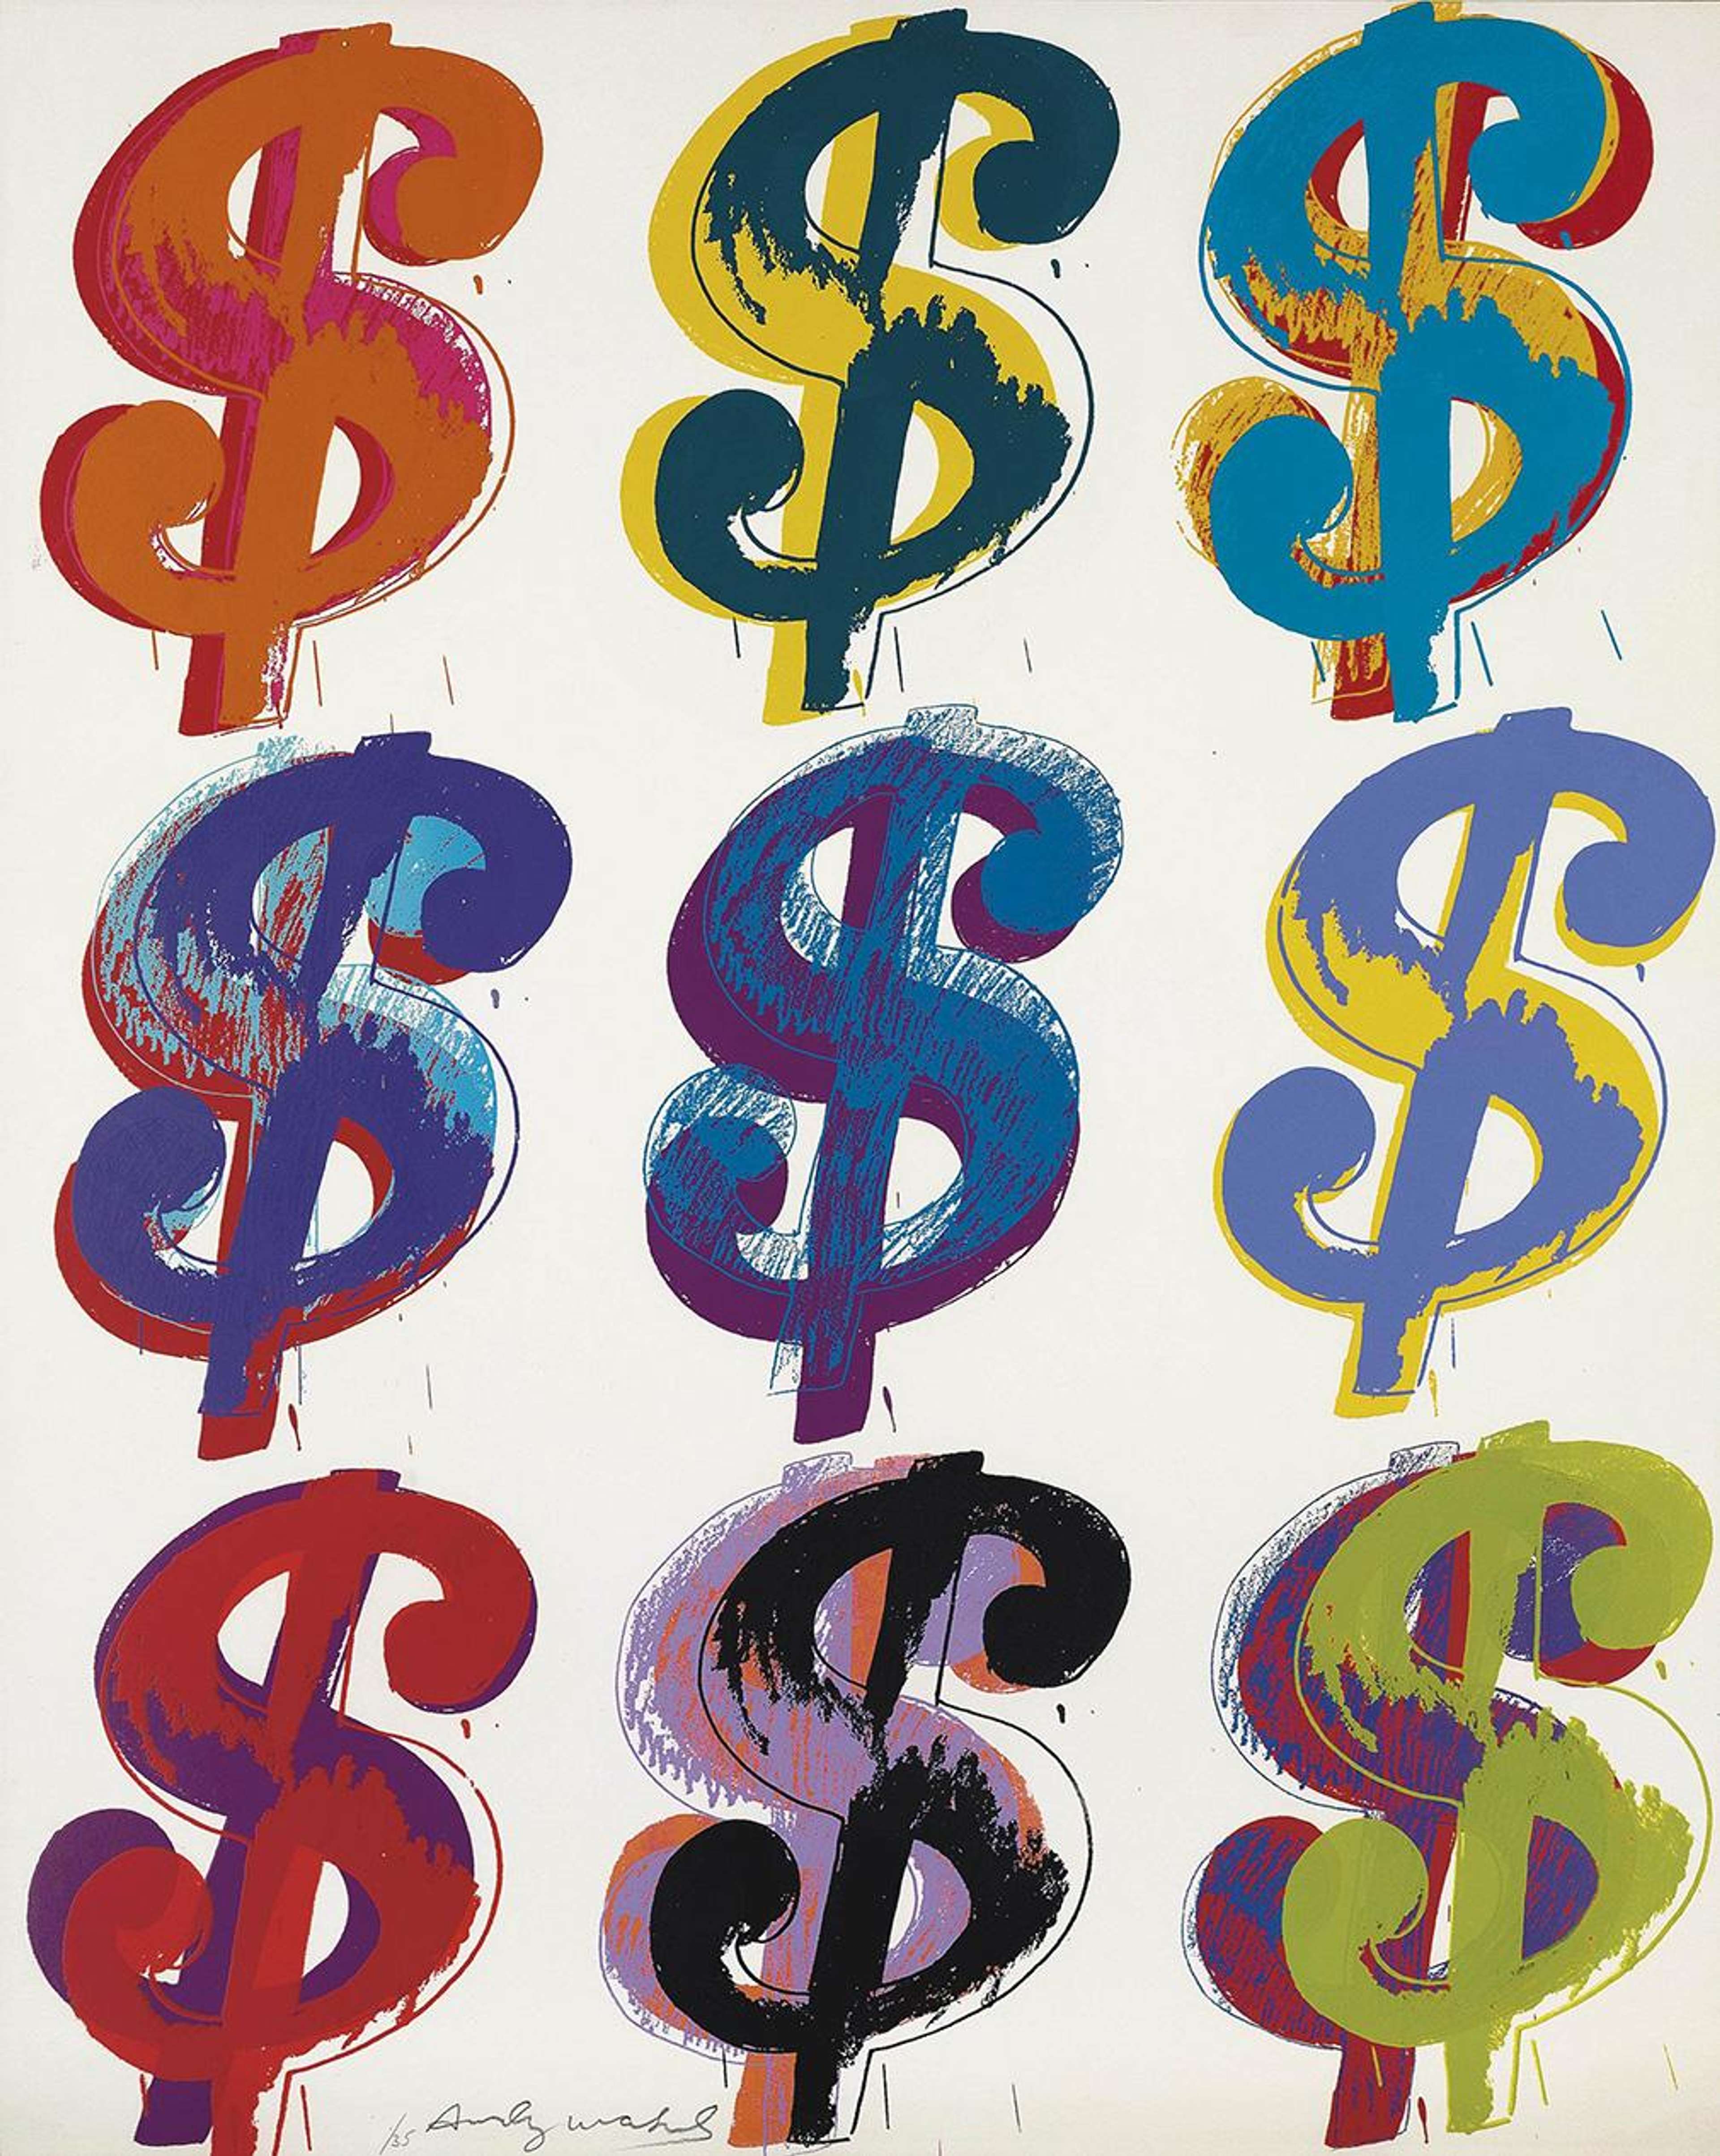 Six dollar signs are printed in a pattern, in three rows of three, against a white background. Each of the dollar signs is printed in a different colour, and overlaid with different layers of colour to create tone and texture.